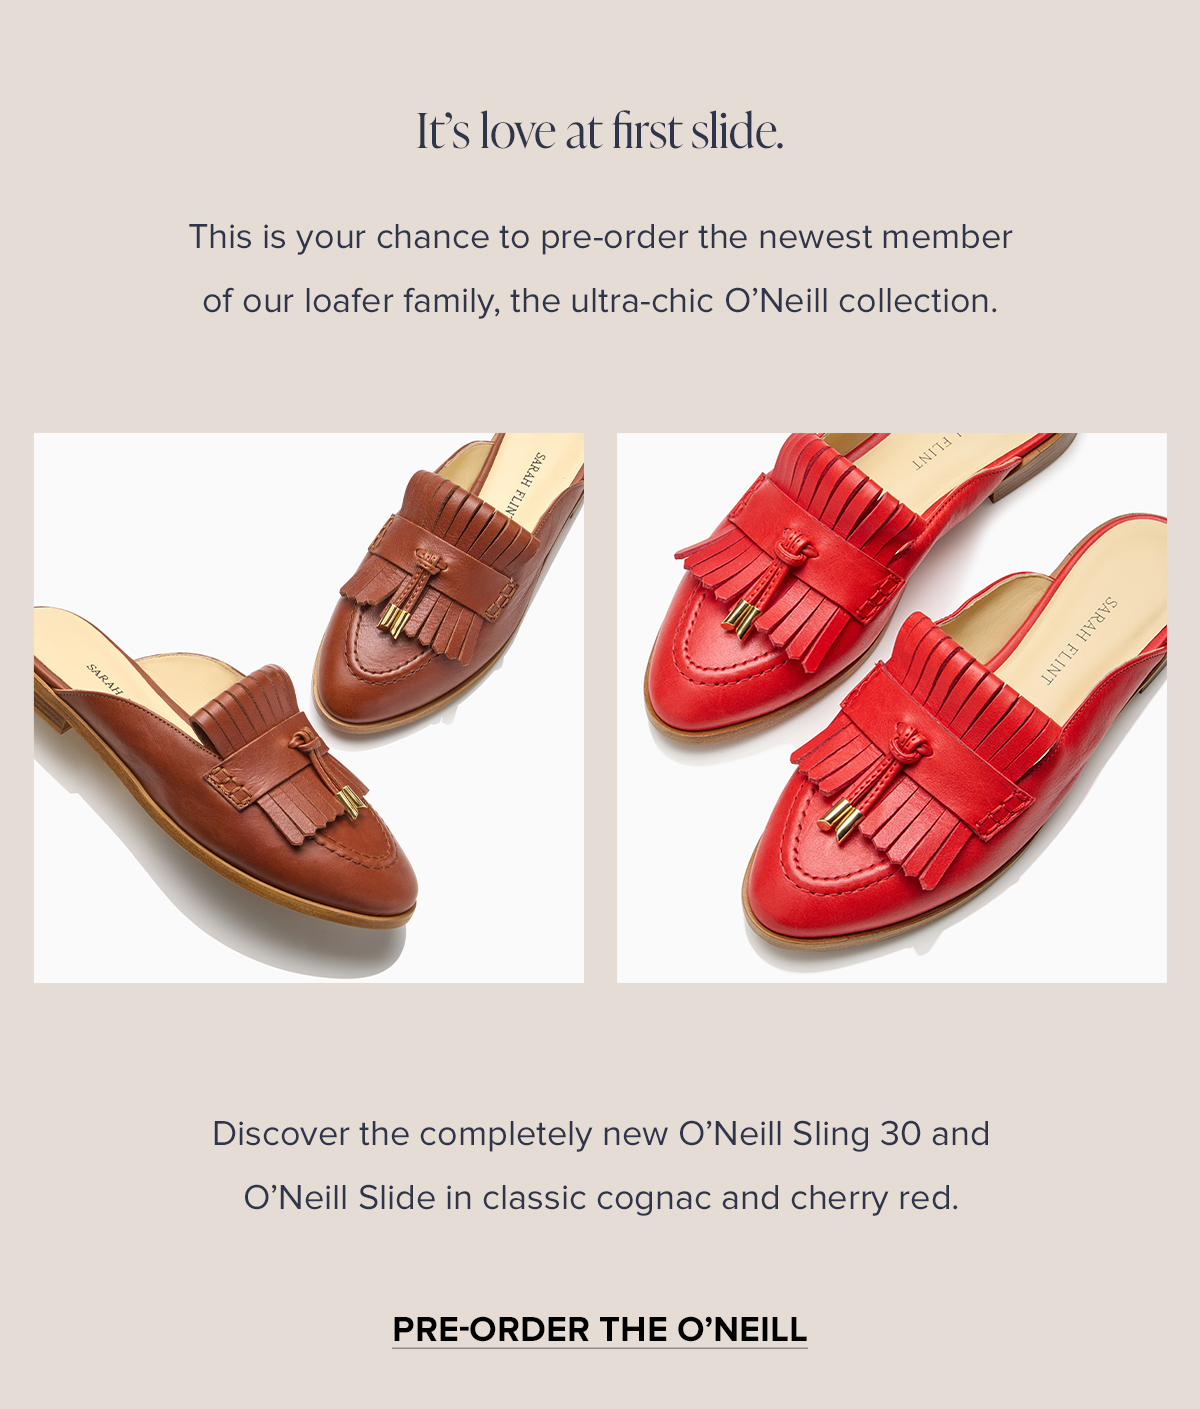 It's love at first slide. This is your chance to pre-order the newest member of our loafer family, the ultra-chic O'Neill collection. Discover the completely new O'Neill Sling 30 and O'Neill Slide in classic cognac and cherry red.